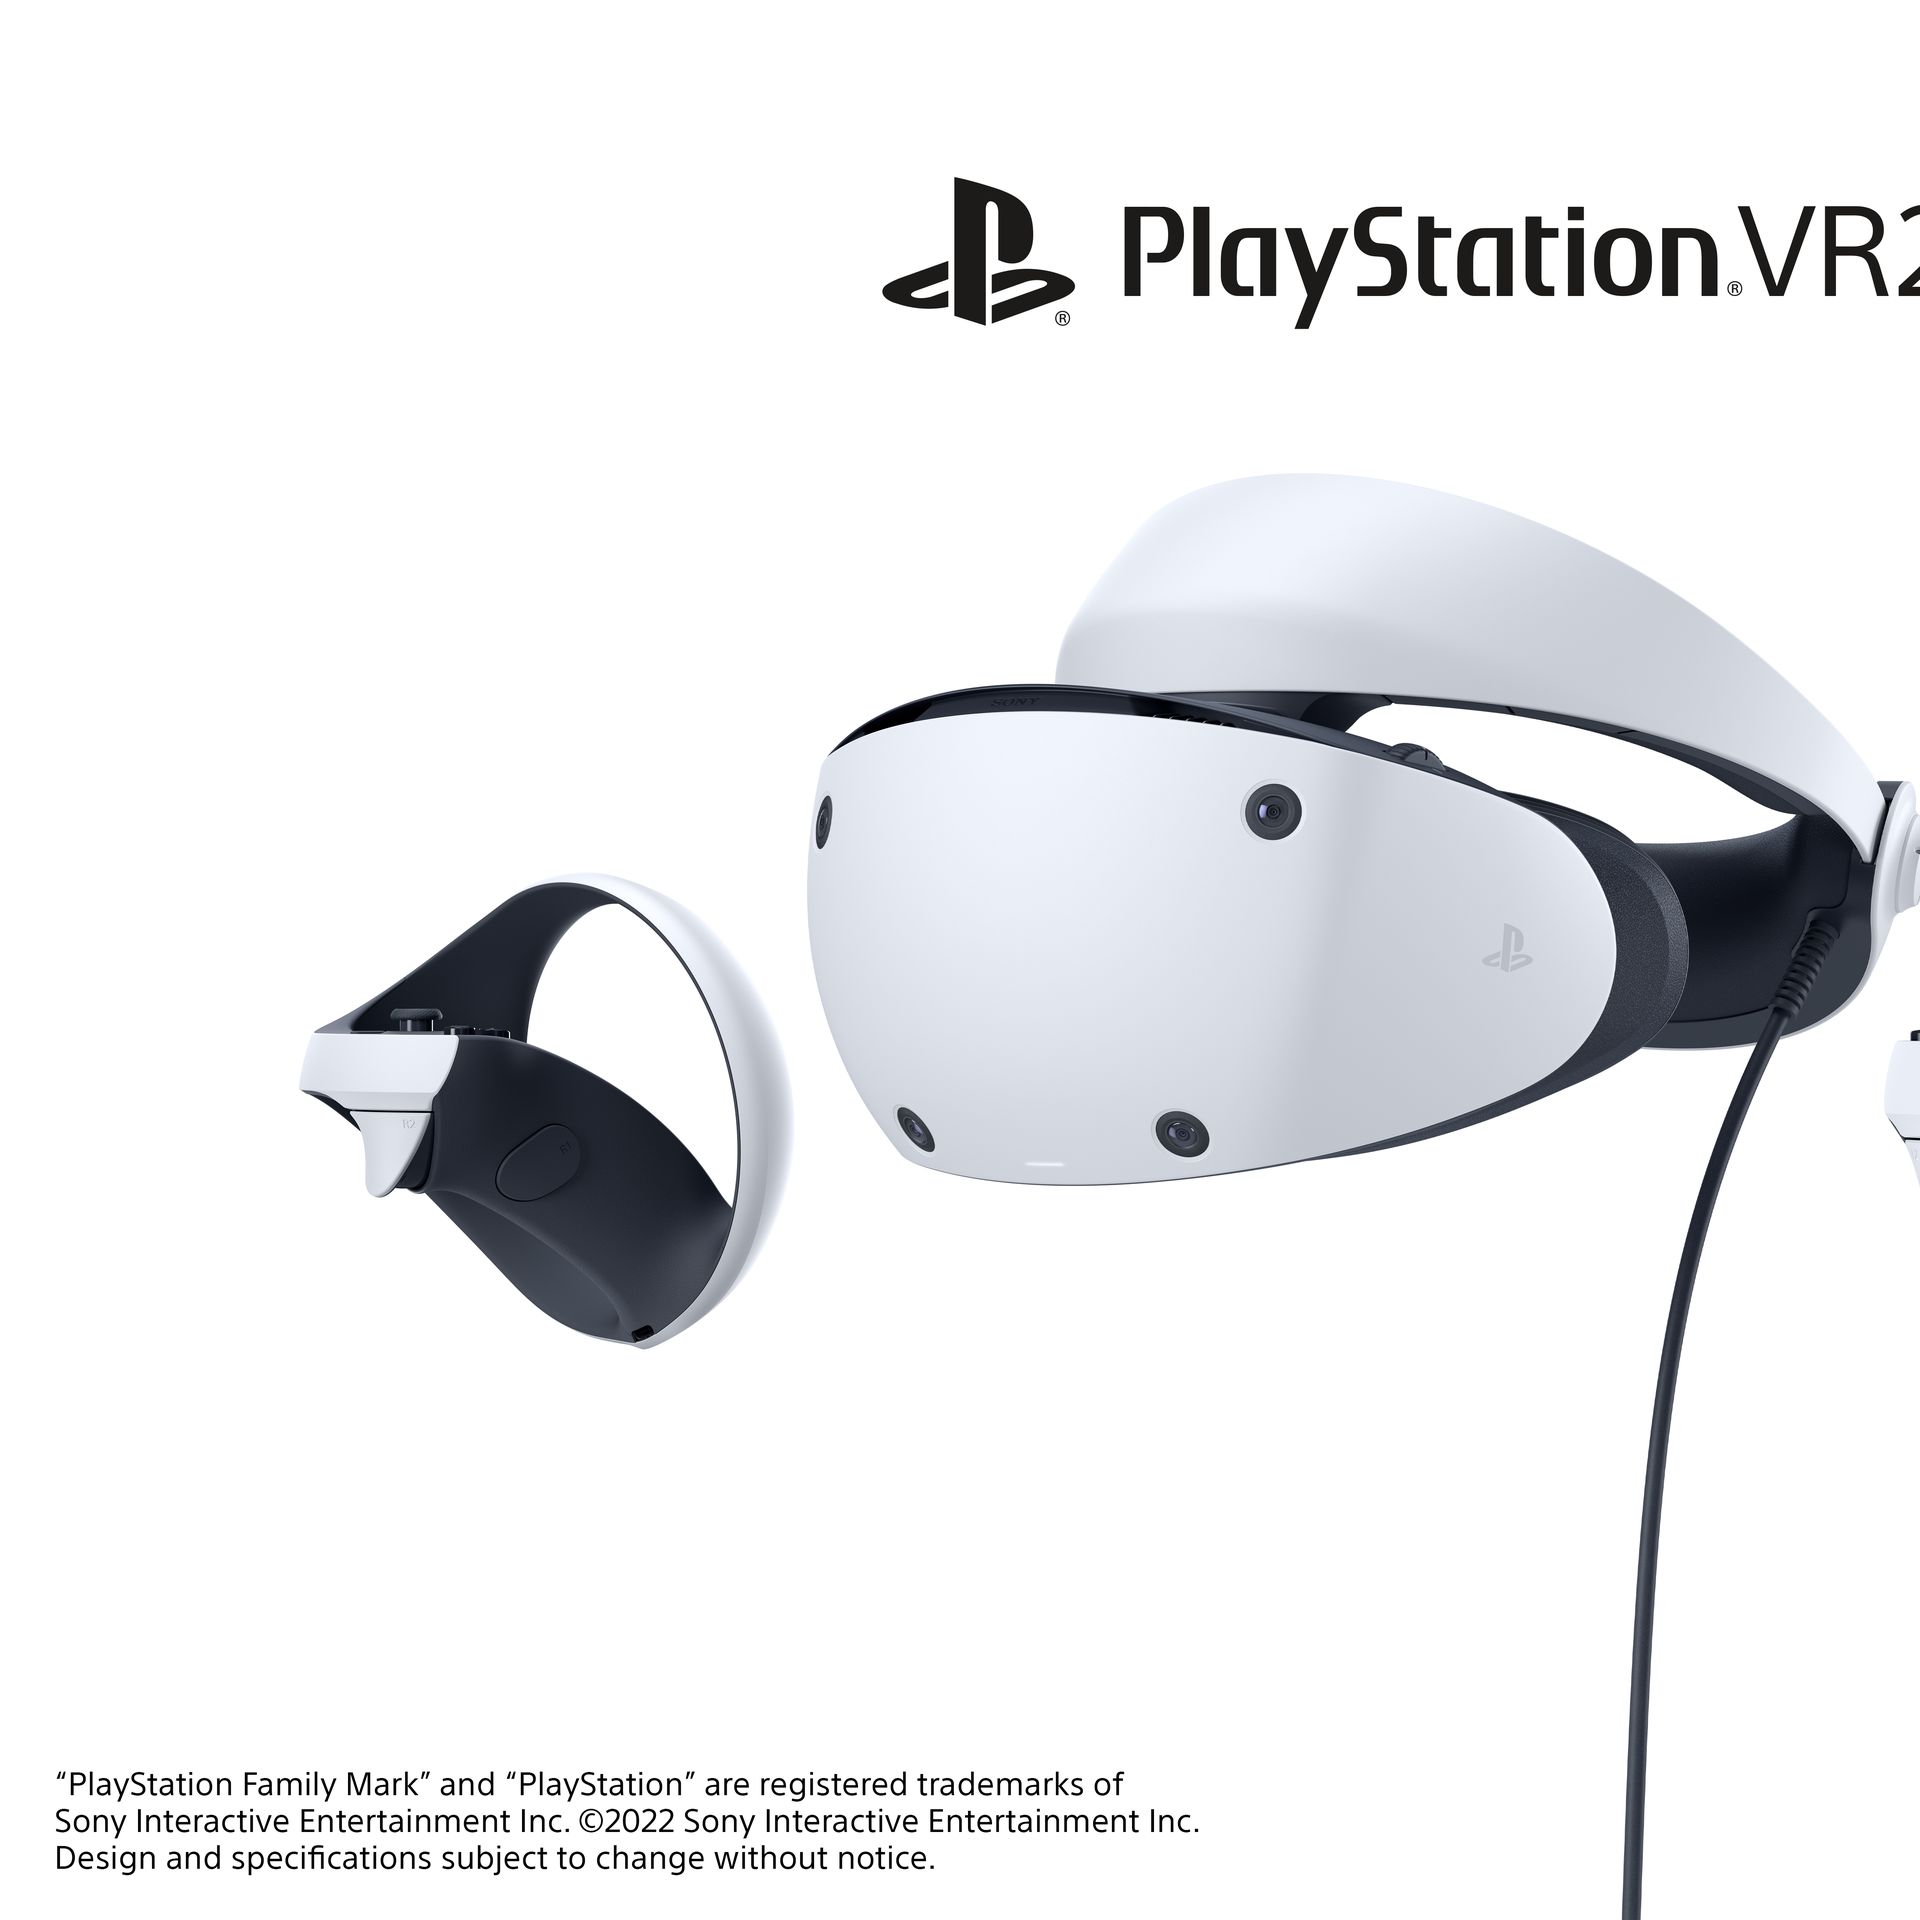 PlayStation VR2 specs, price and questions answered by Sony - Geeky Gadgets